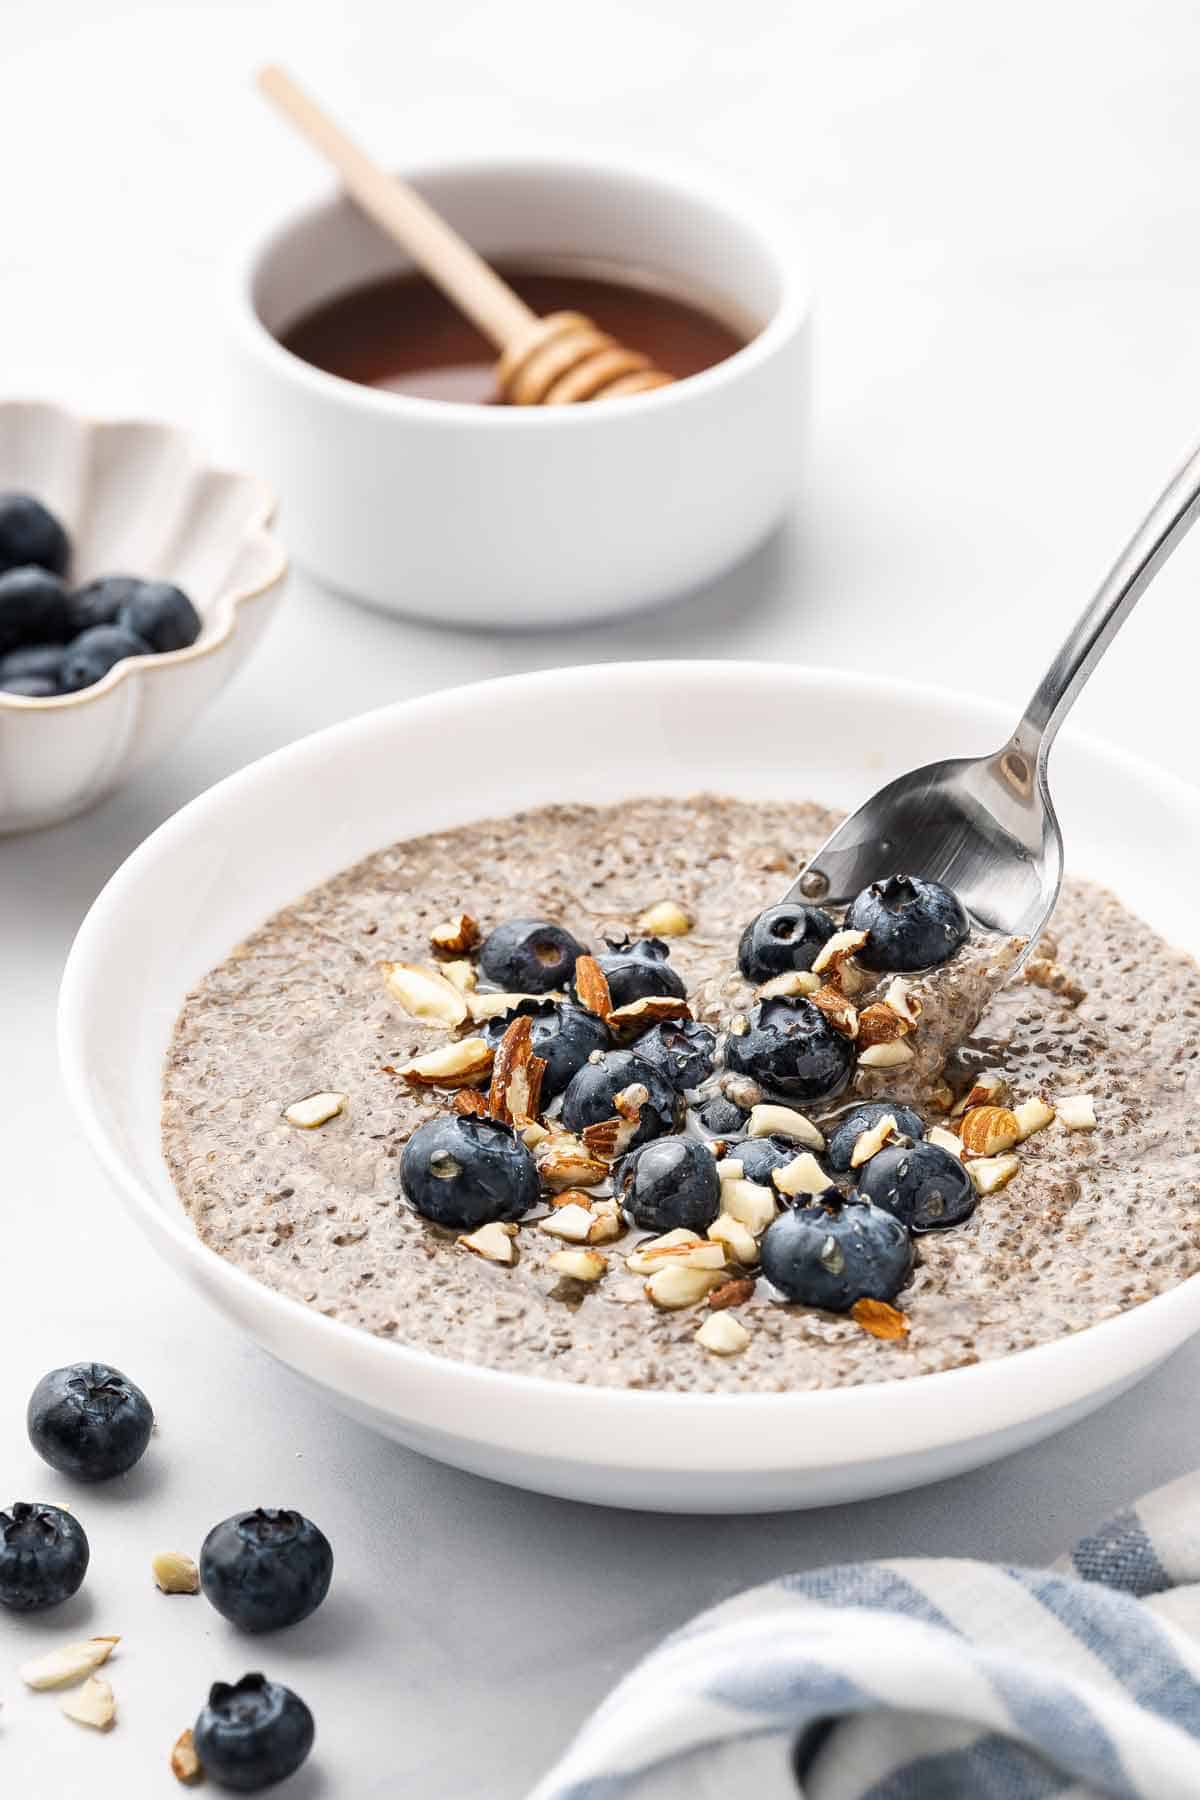 A bowl of warm chia pudding with a spoonful being lifted out.